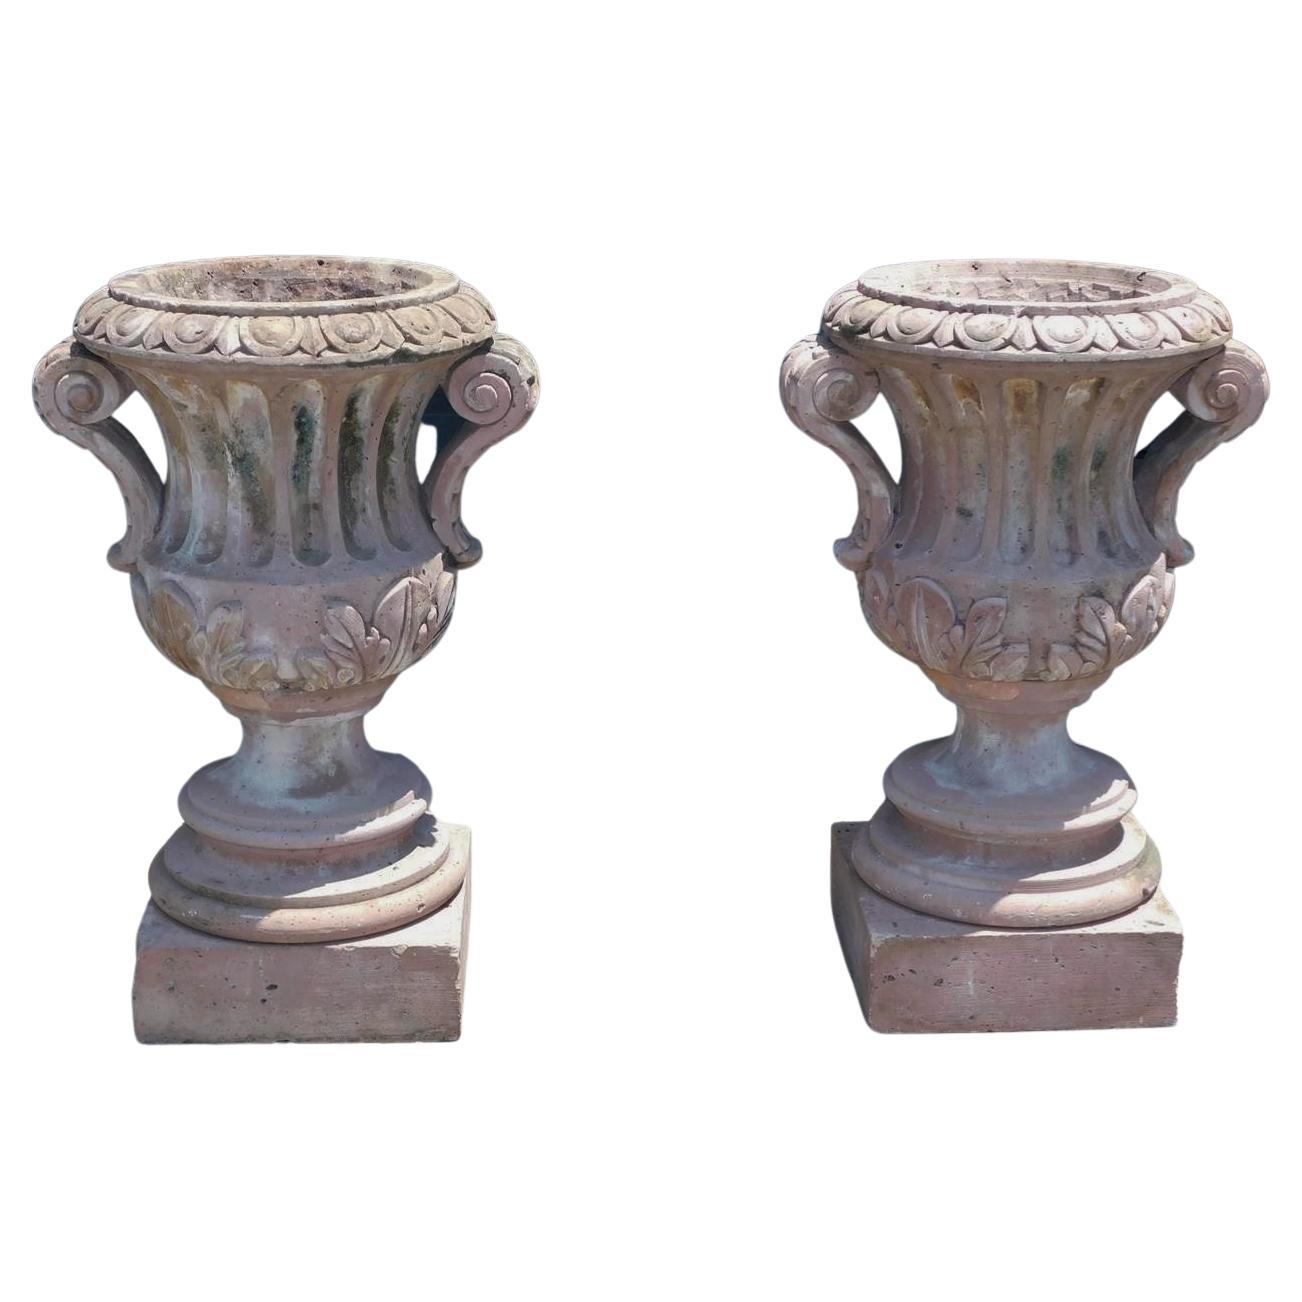 Pair of Italian Carved Sandstone Fluted Campagna Form Garden Urns.  Circa 1800